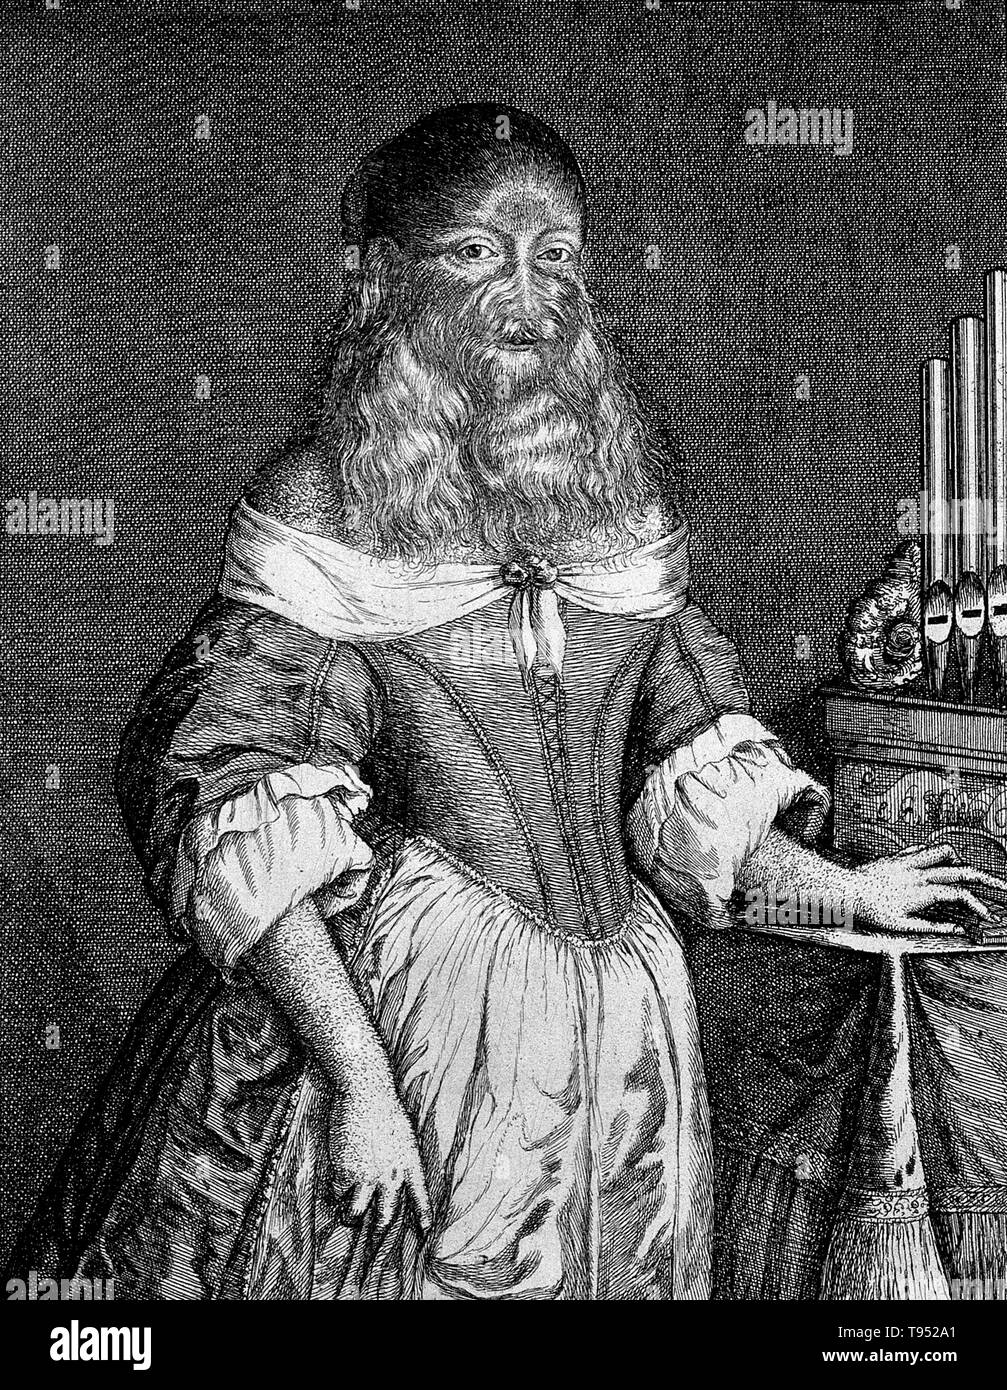 Barbara van Beck (February 18, 1629 - ?) was a German woman who suffered from a rare genetic disorder, hypertrichosis universalis, also known as Ambras or werewolf syndrome. Her parents had no sign of this hereditary condition so her birth must have been a considerable surprise to them. She first came to prominence in 1639 when the anatomist Thomas Bartholin saw her exhibited in Copenhagen. He noted that her 'entire body was covered with soft, blond hair and a luxuriant beard'. Stock Photo